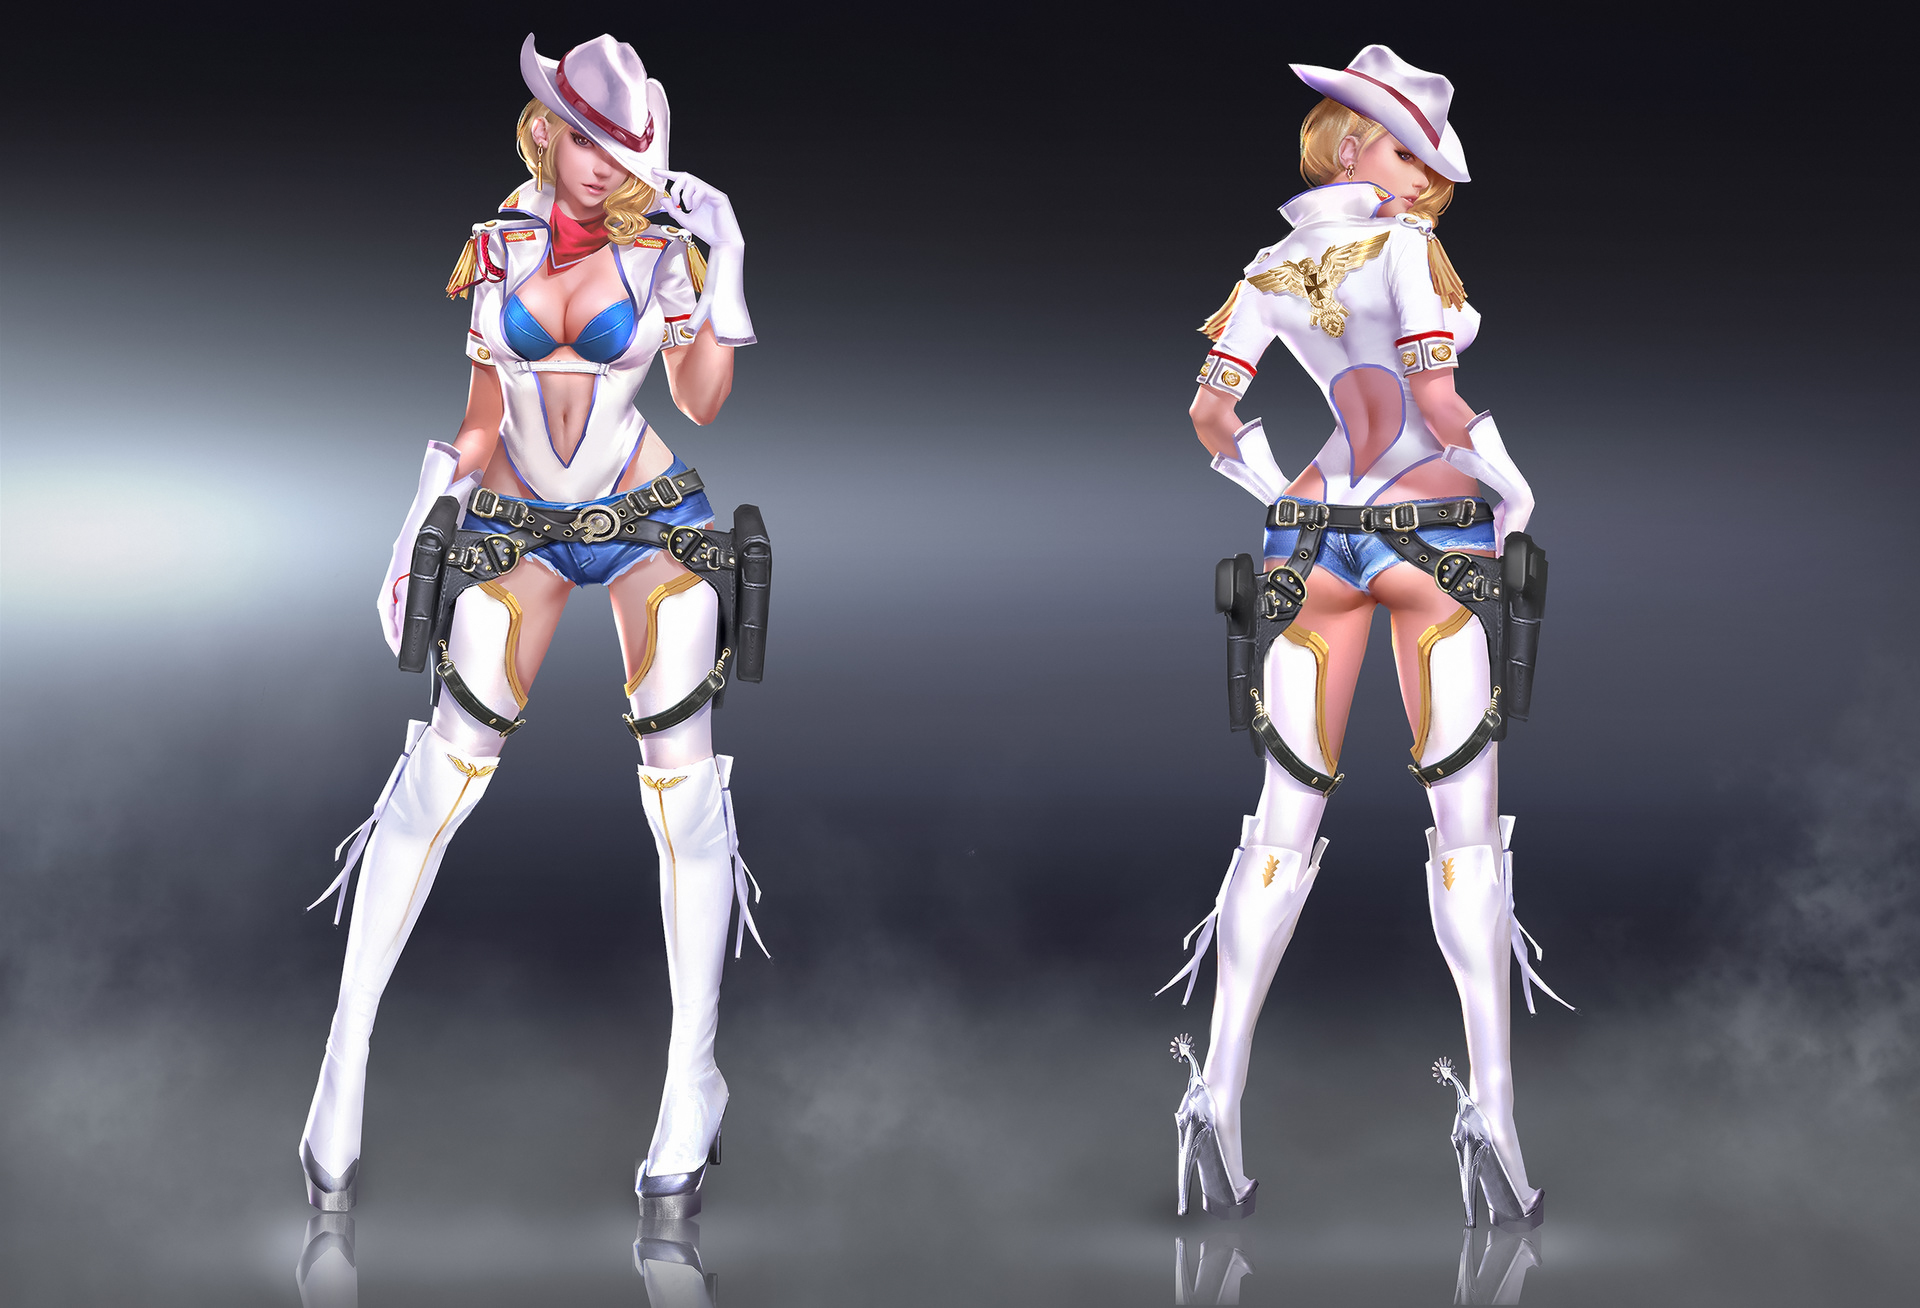 General 1920x1308 Ares (artist) drawing women cowgirl hat blonde skimpy clothes holster weapon thigh high boots concept art